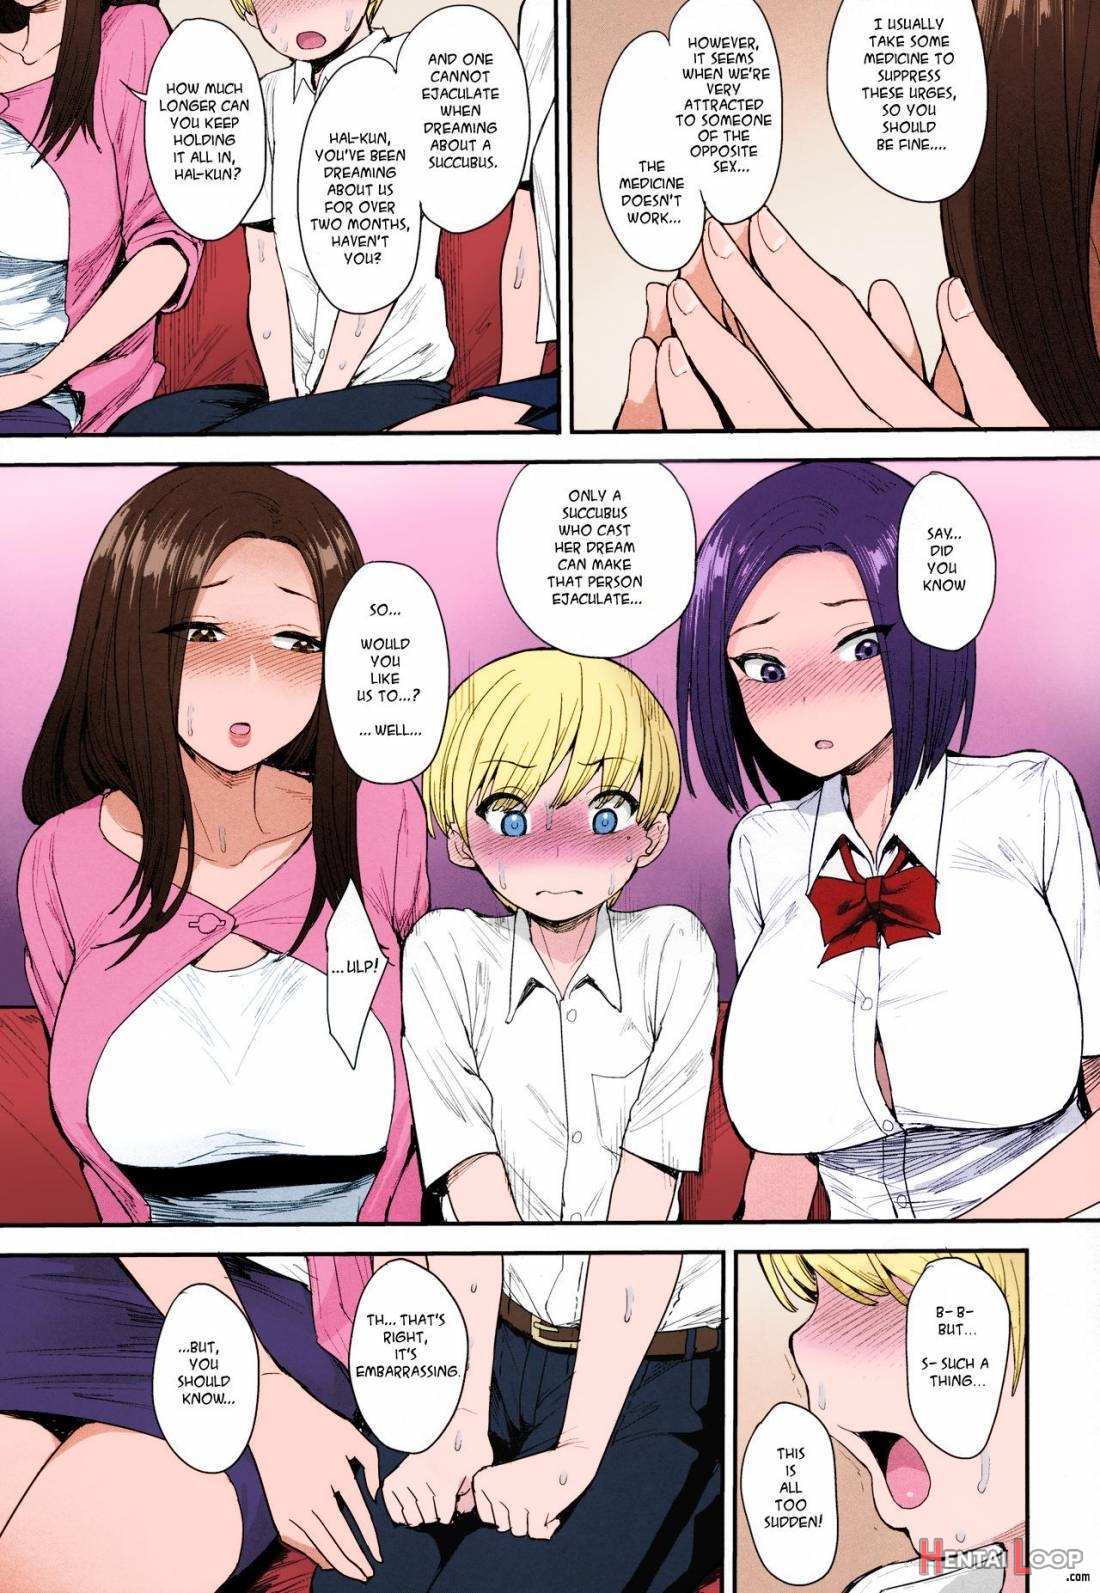 Succubus No Rinjin – Colorized page 10